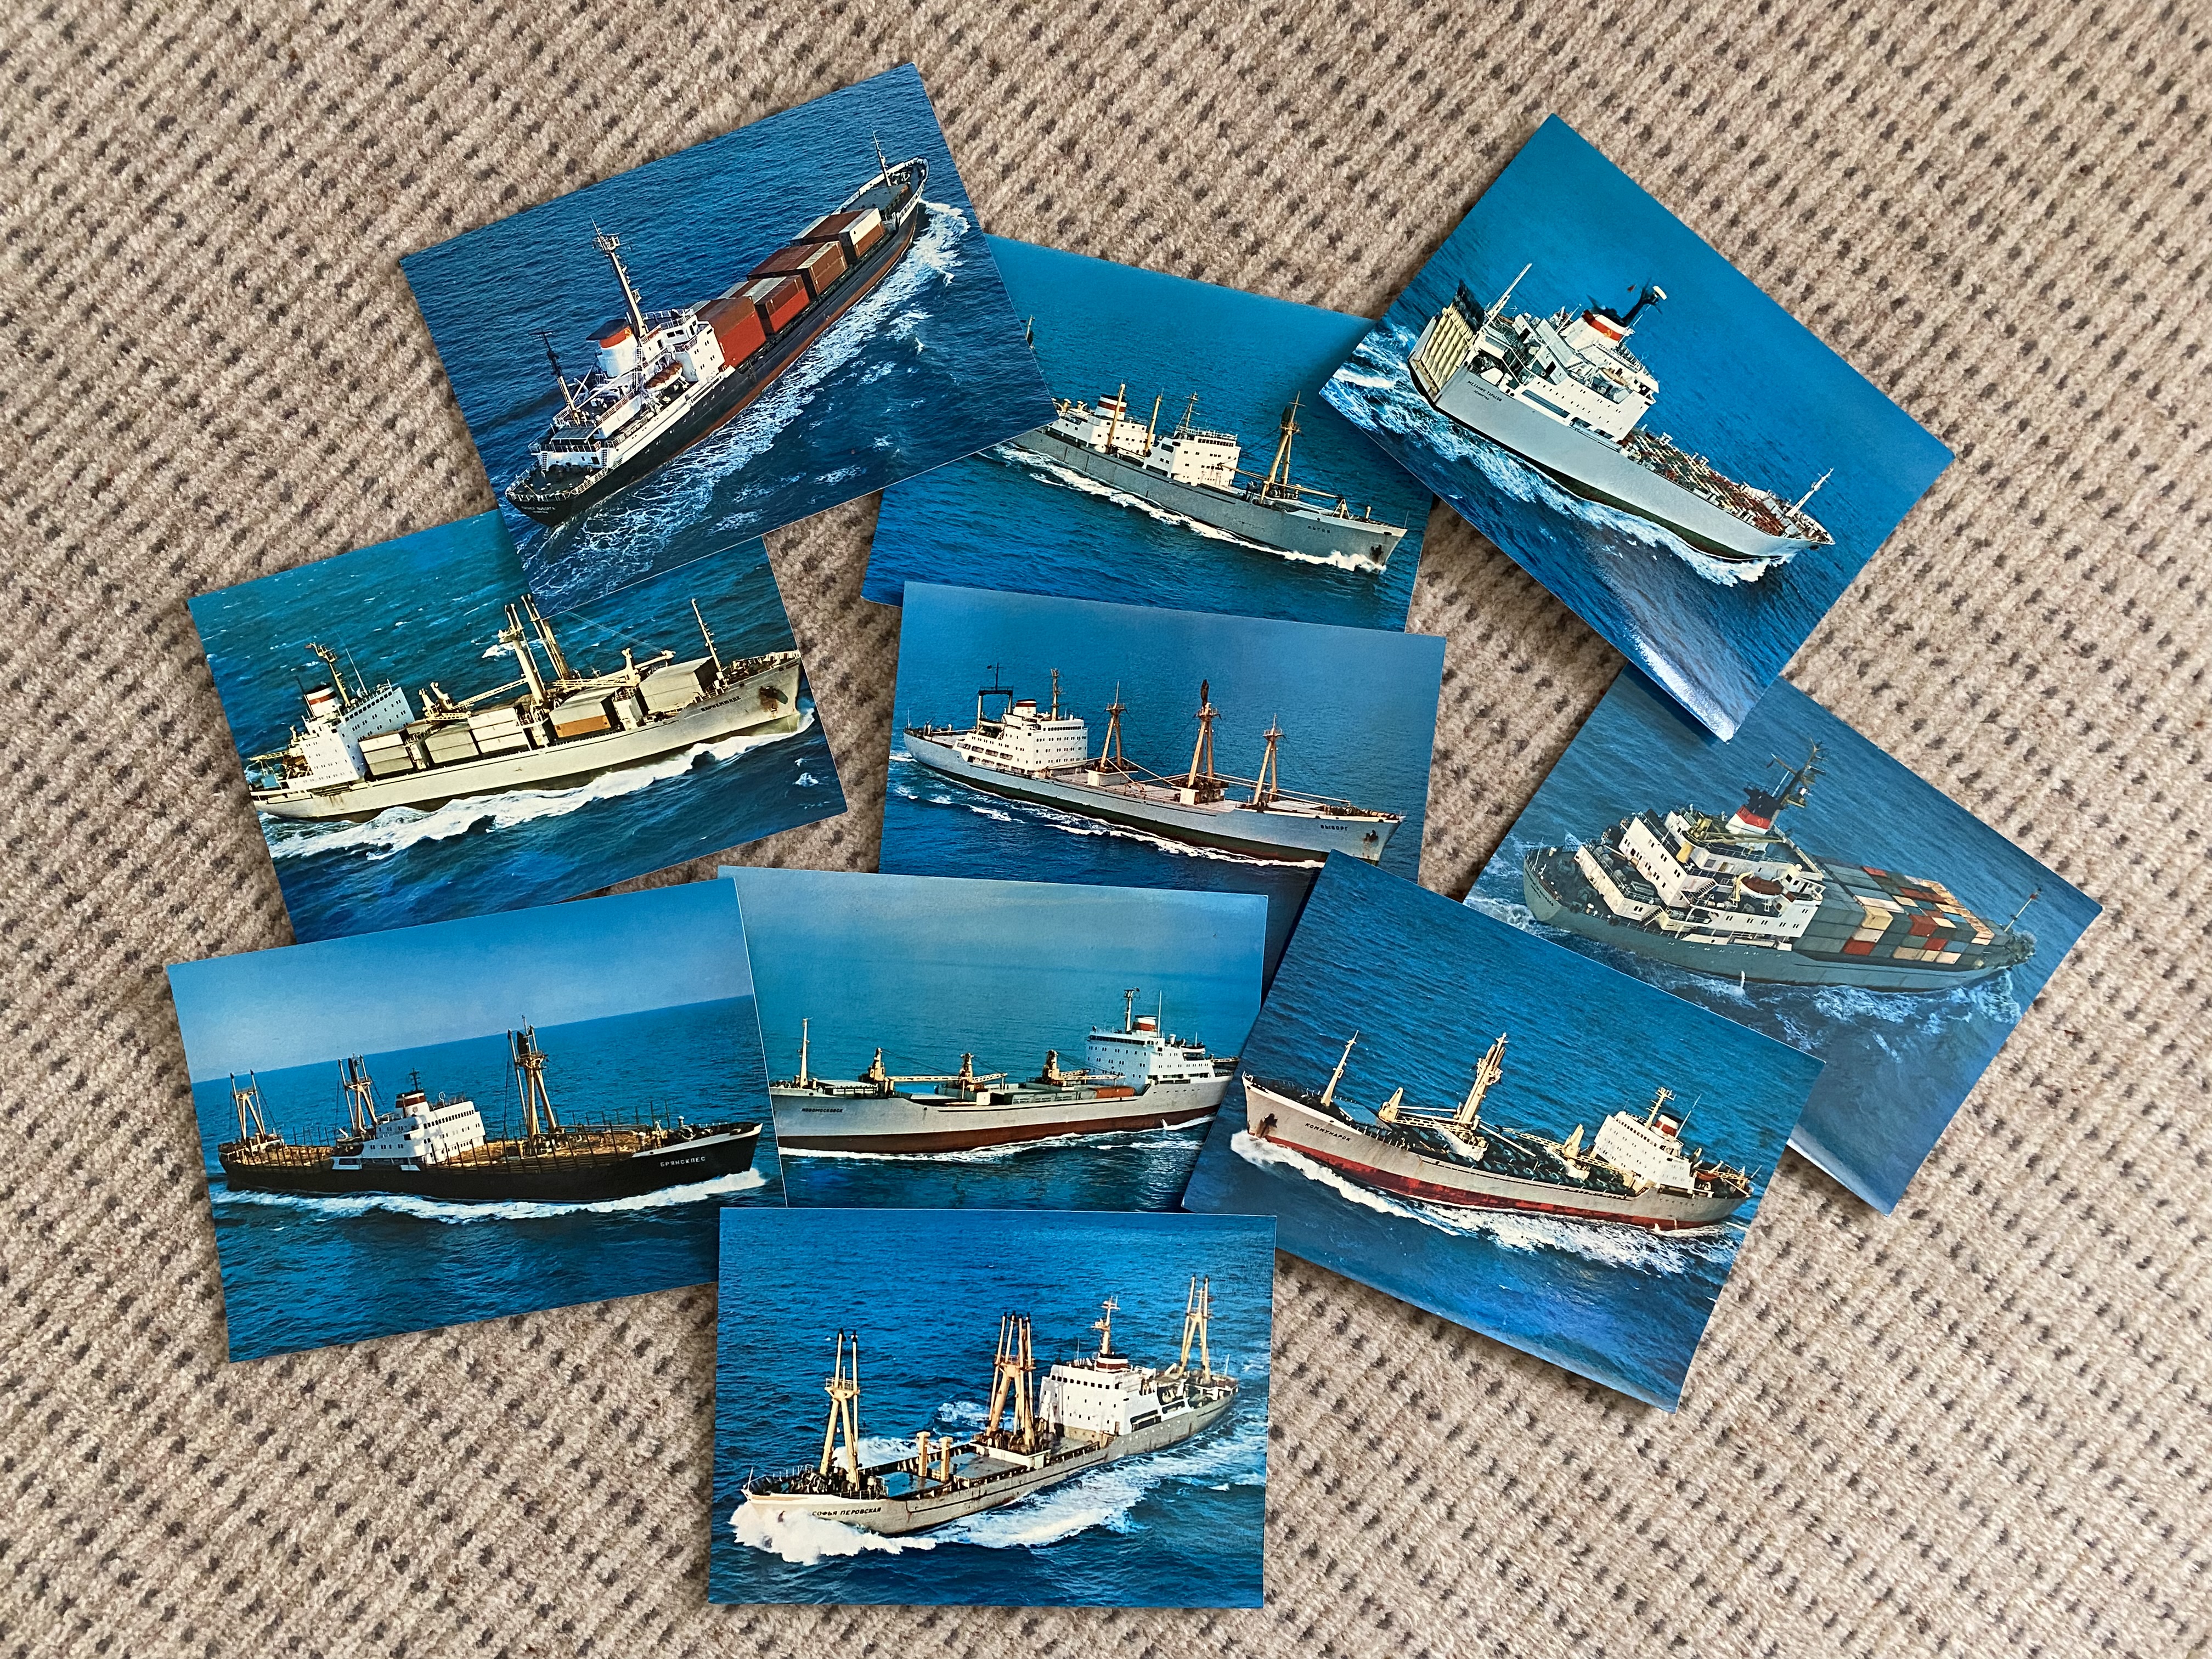 A SET OF OLD LARGE SIZE PHOTOGRAPHS SHOWING VARIOUS CONTAINER/INDUSTRIAL VESSELS AT SEA